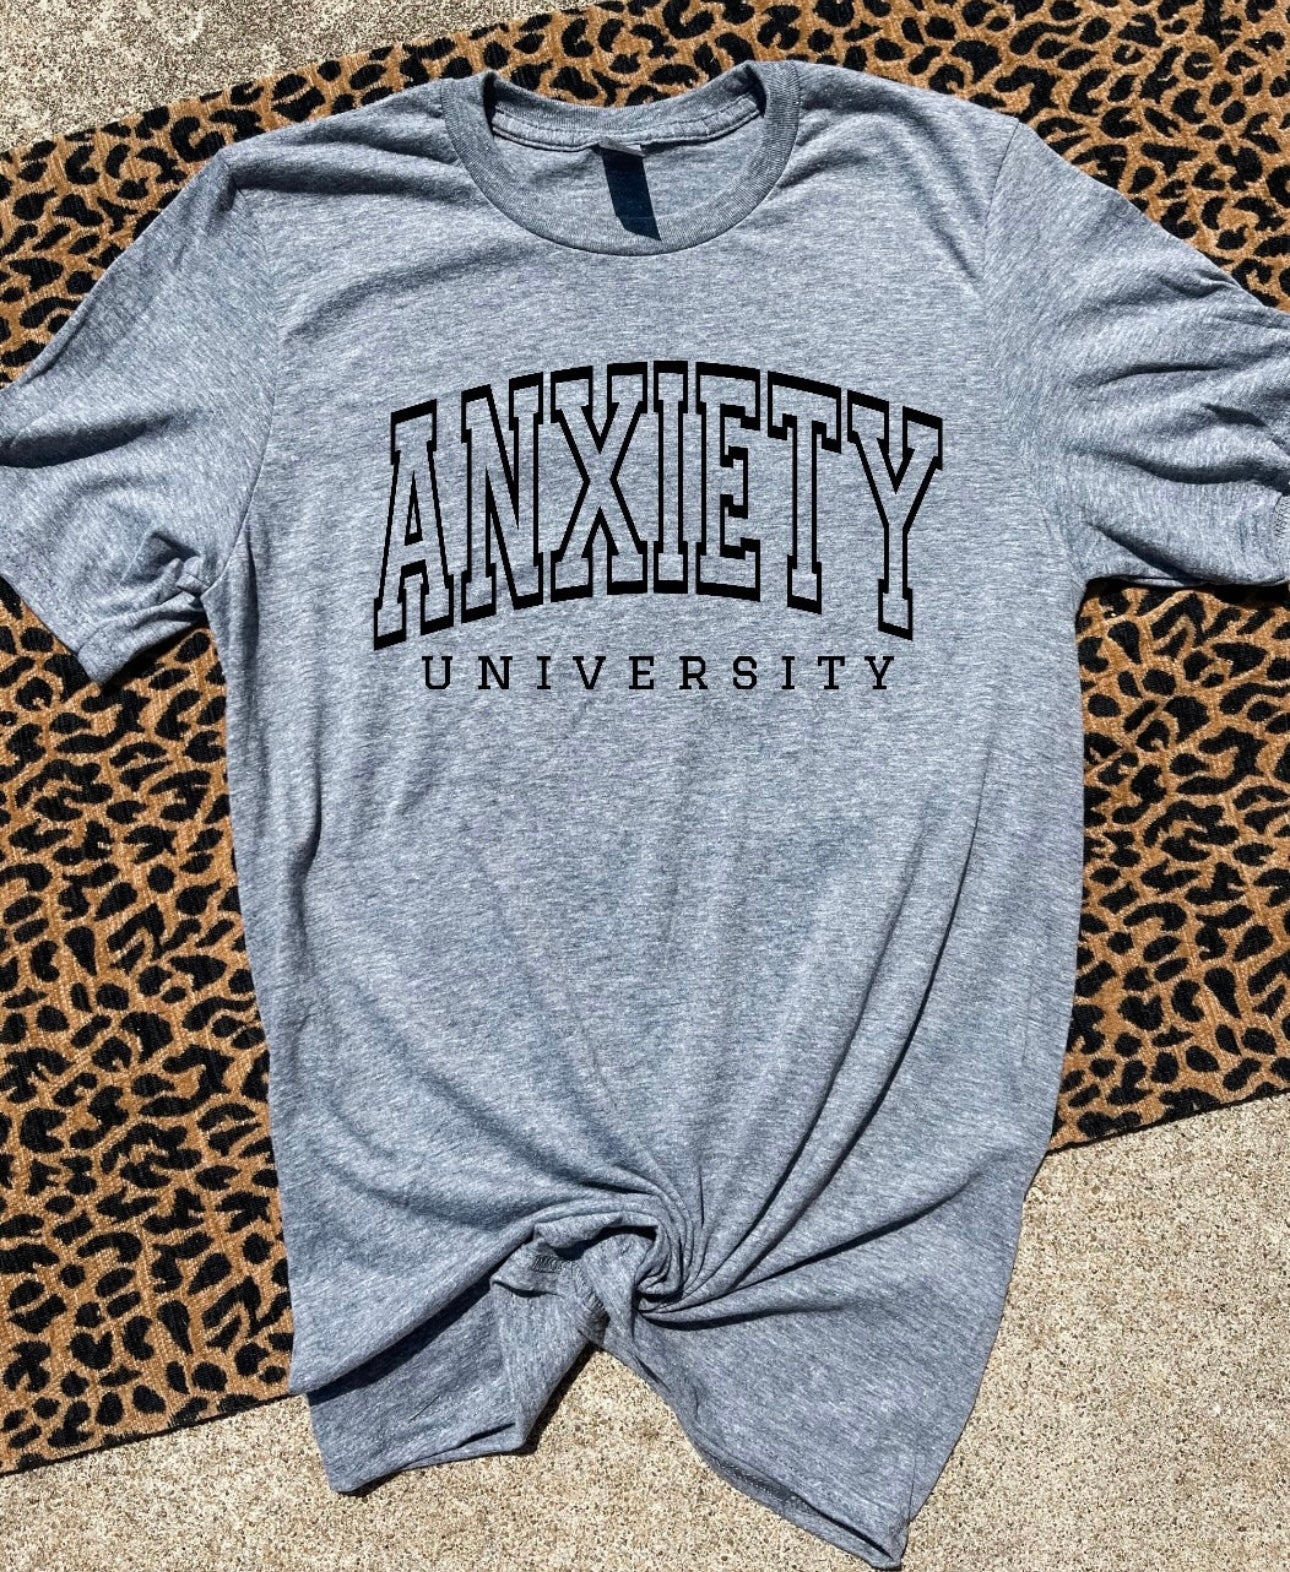 **PINK FRIDAY DEAL** Anxiety University Charcoal Tee